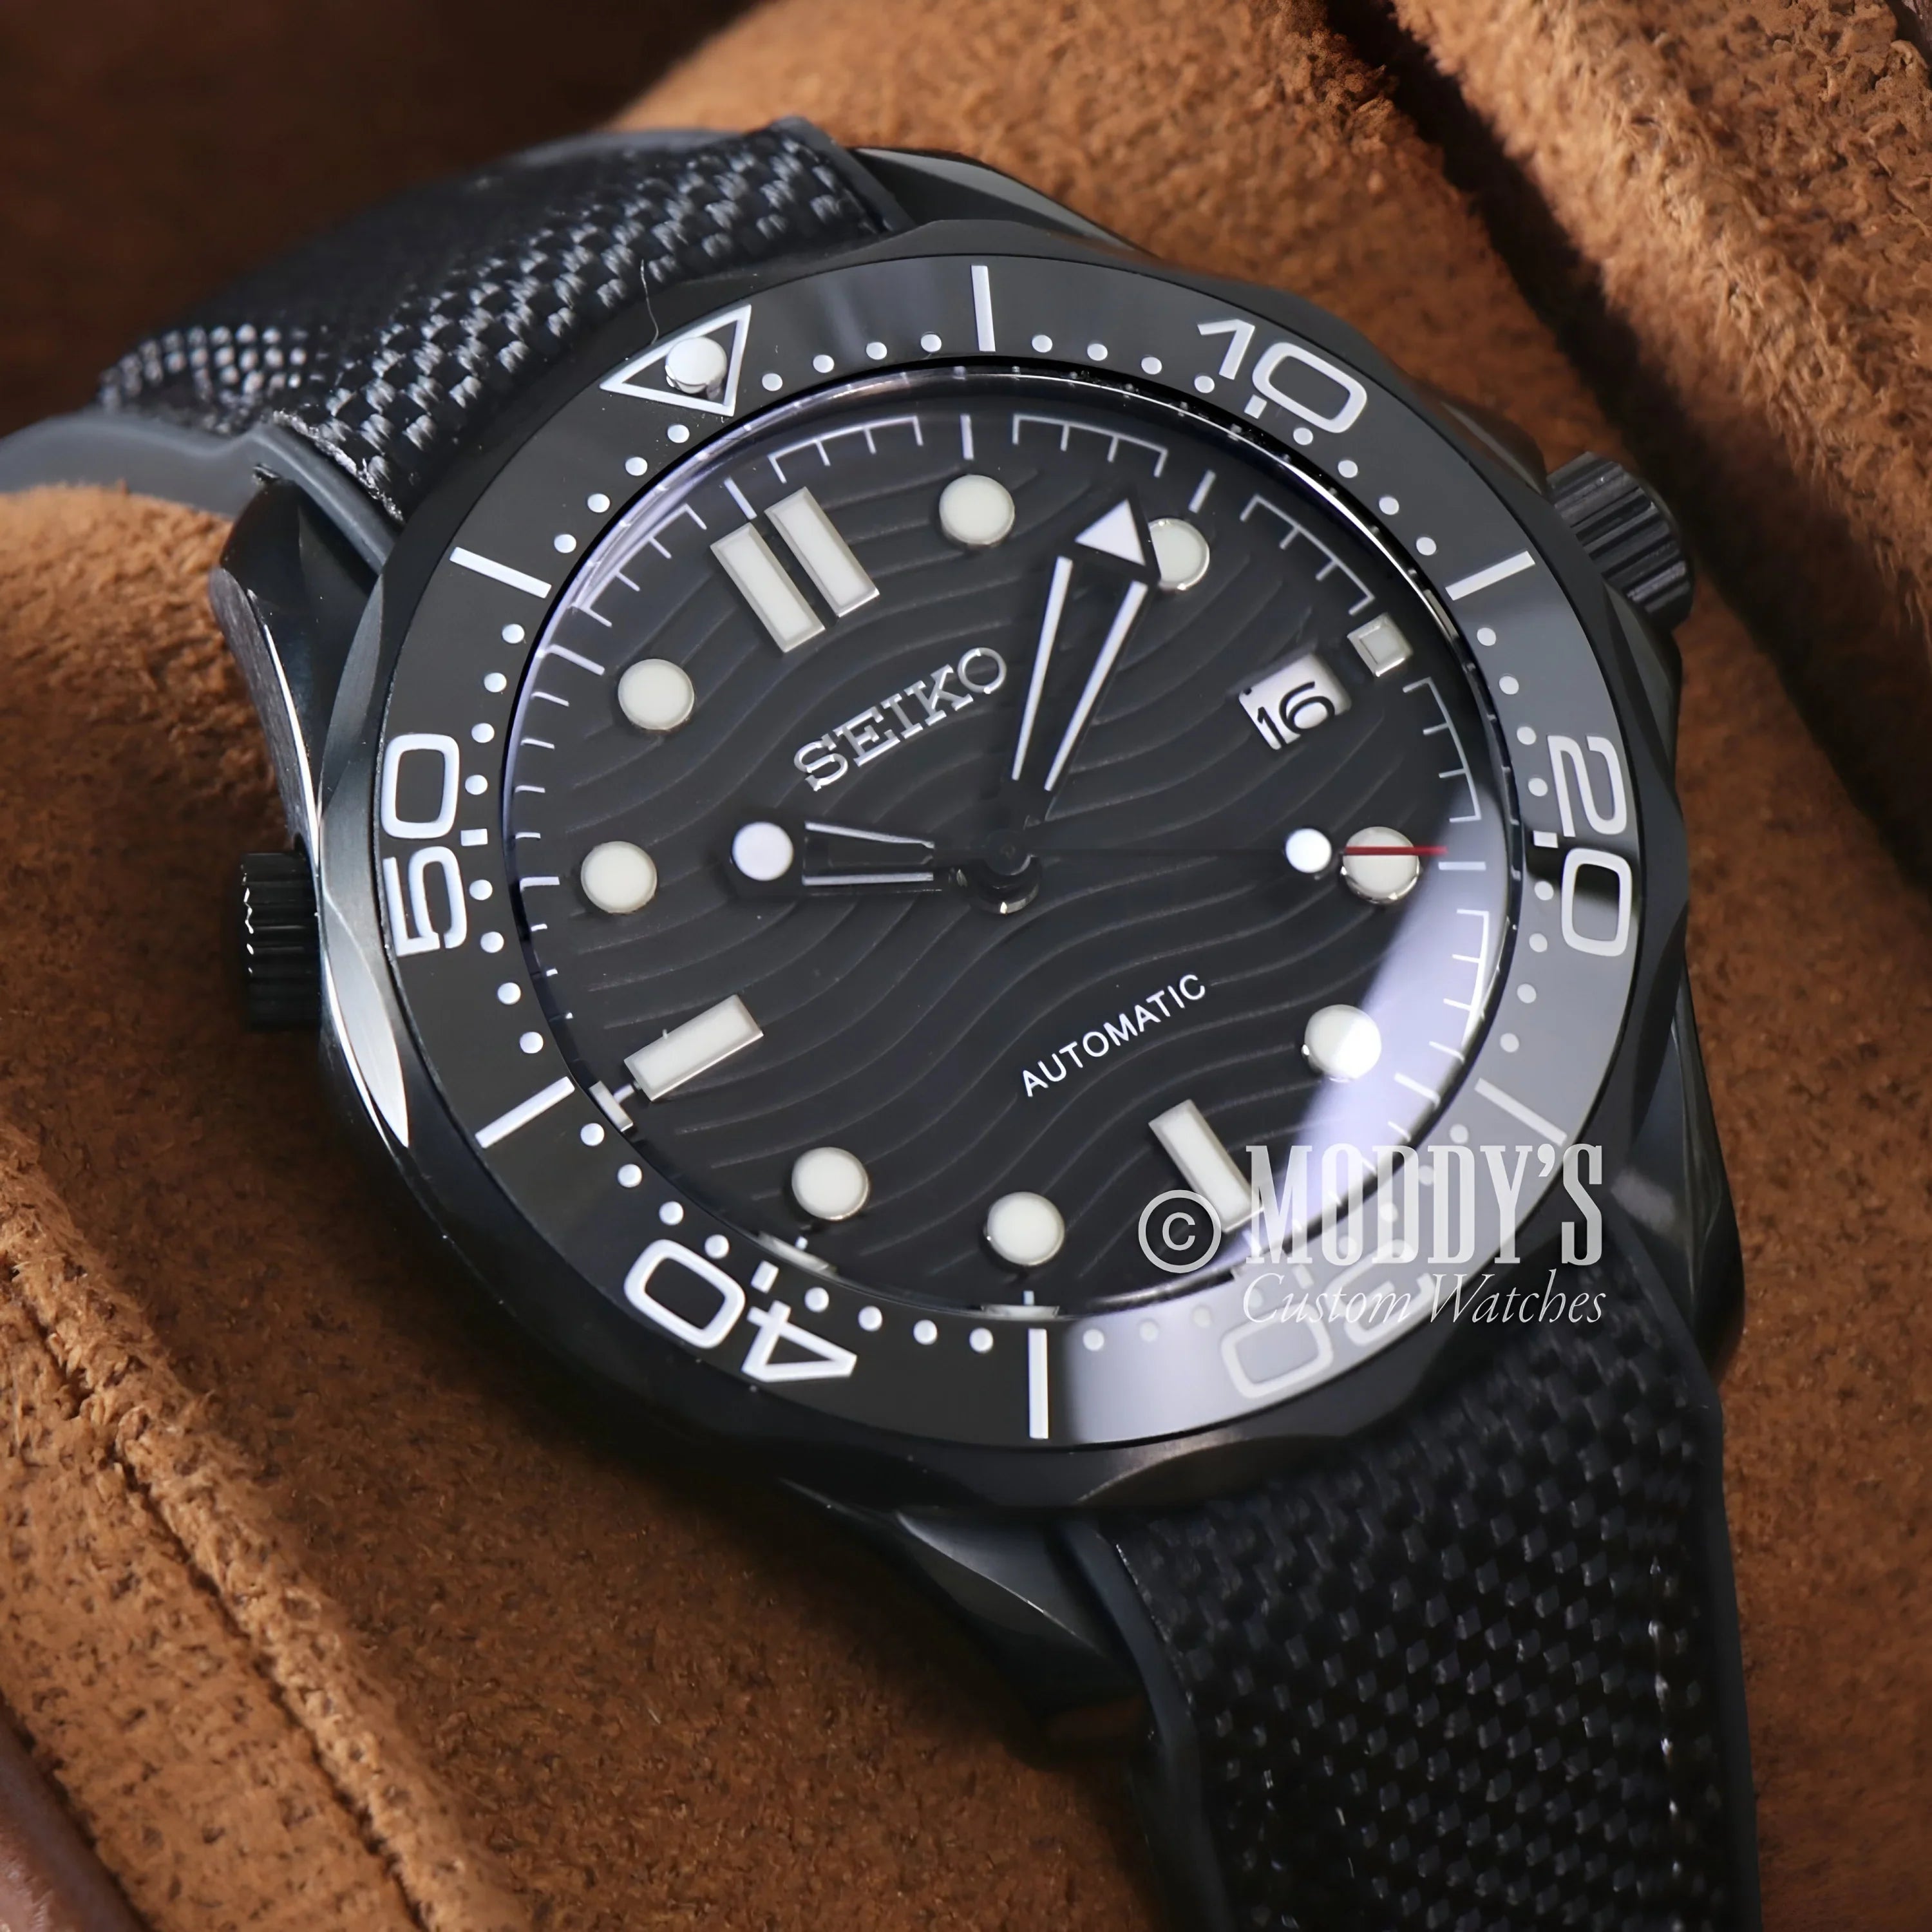 Close-up Of Seikomaster Full Black Watch With Black Strap On Brown Cloth, Featuring Nh35 Automatic